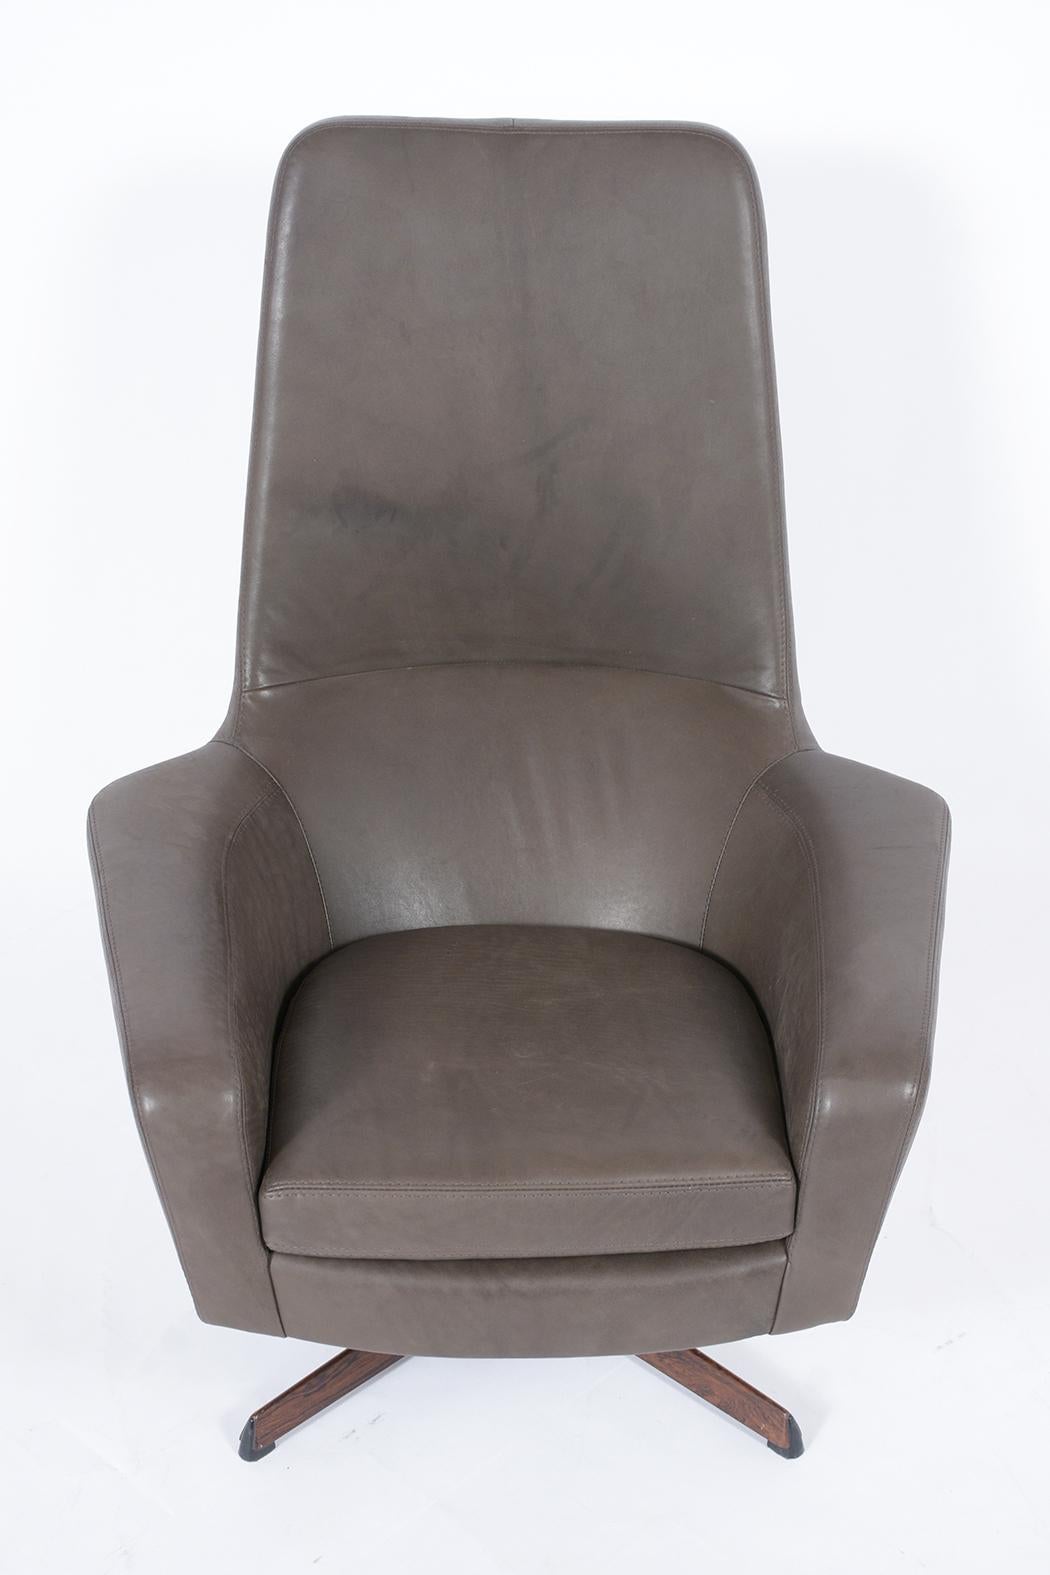 Dyed Restored Vintage Ib Kofod-Larsen Swivel Lounge Chair & Ottoman in Grey Leather For Sale